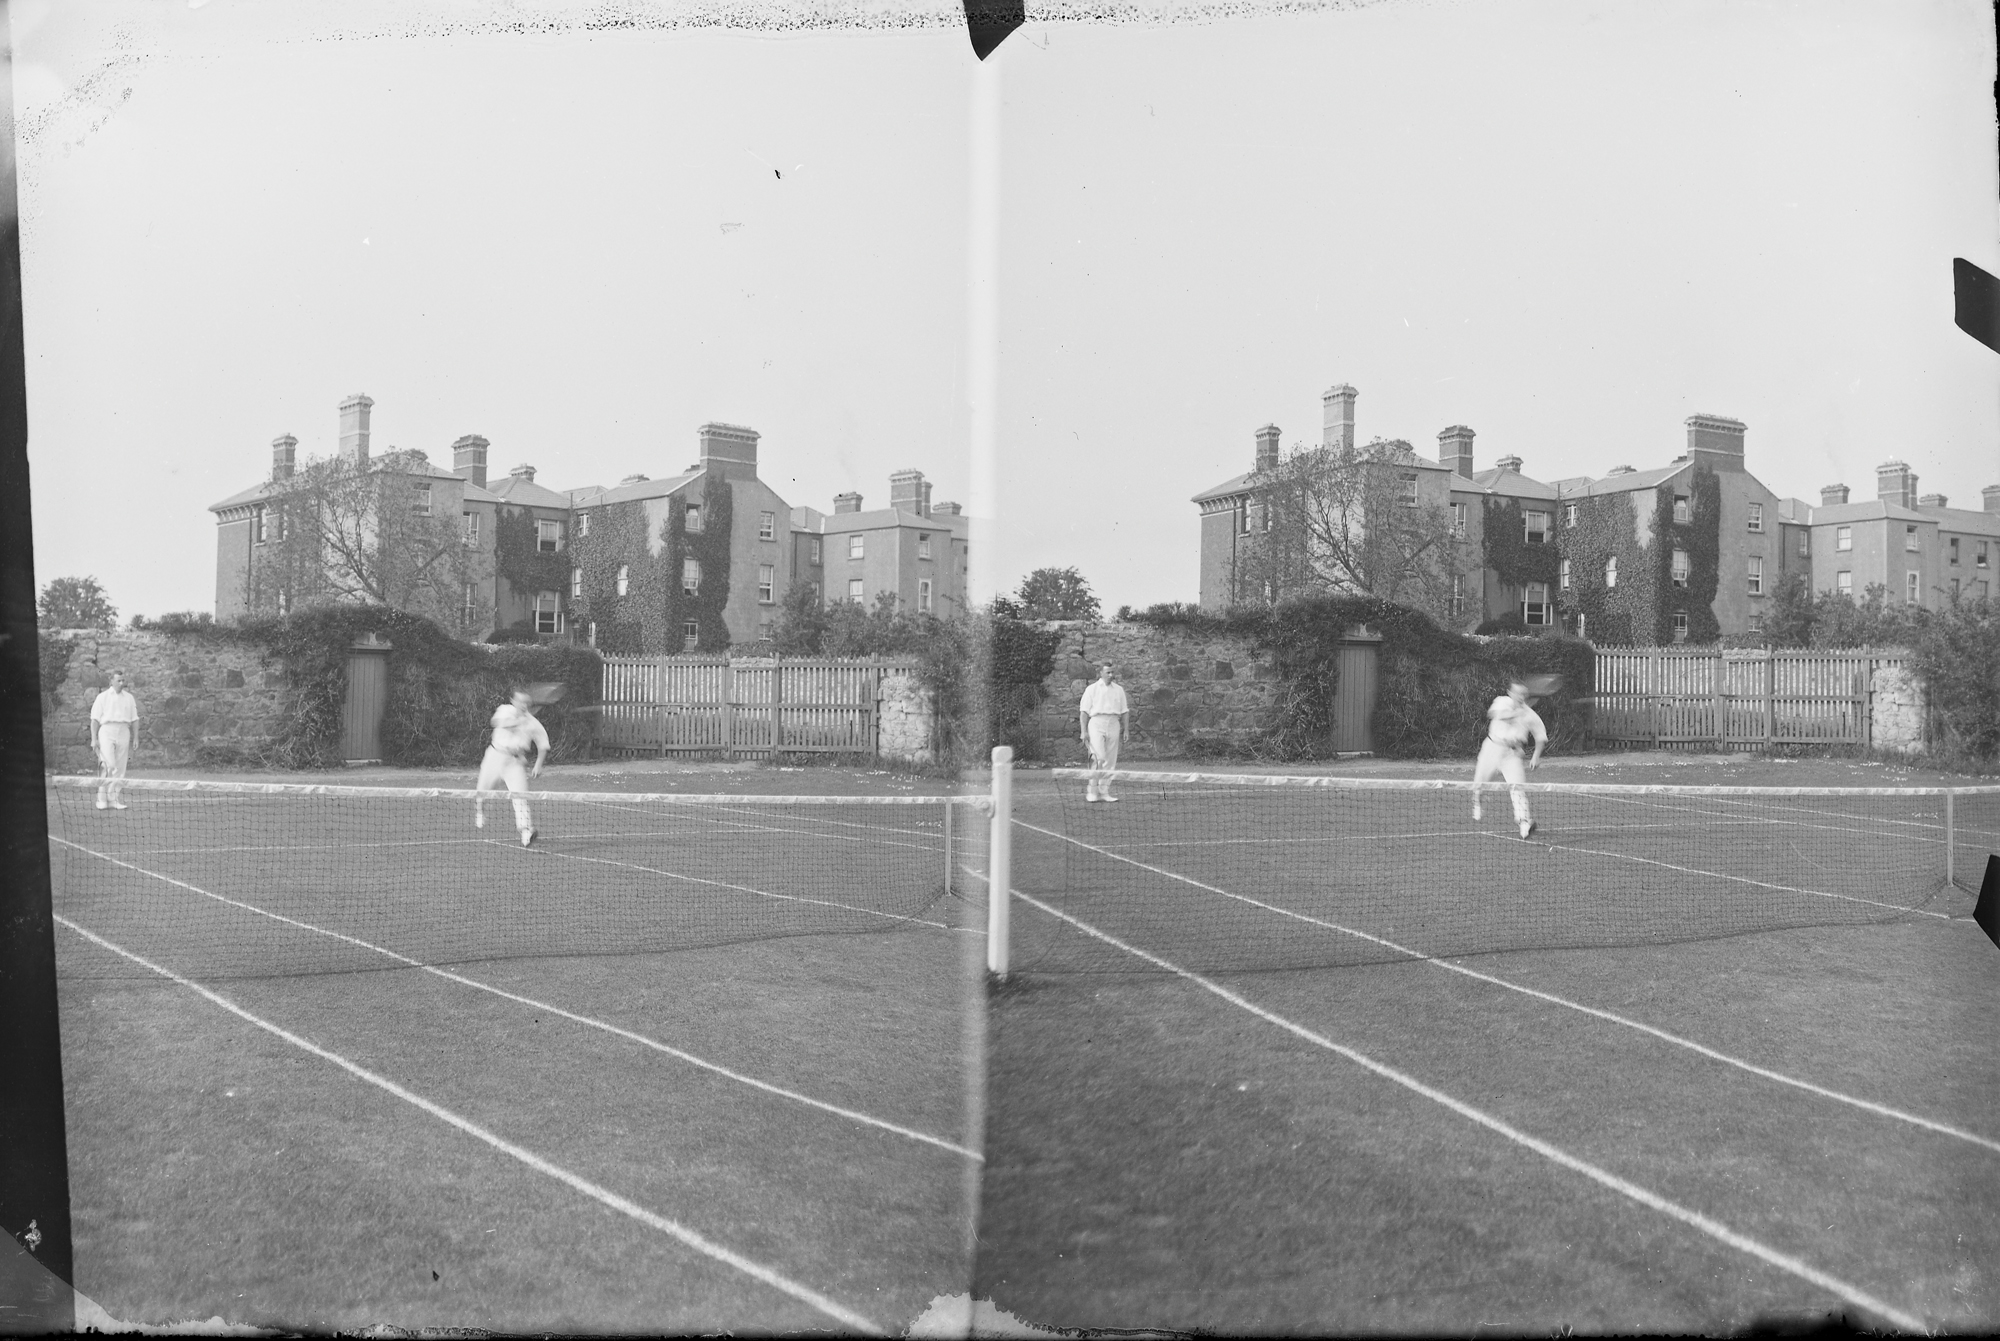 Stereo view of tennis court with a doubles match taking place, large house in the background